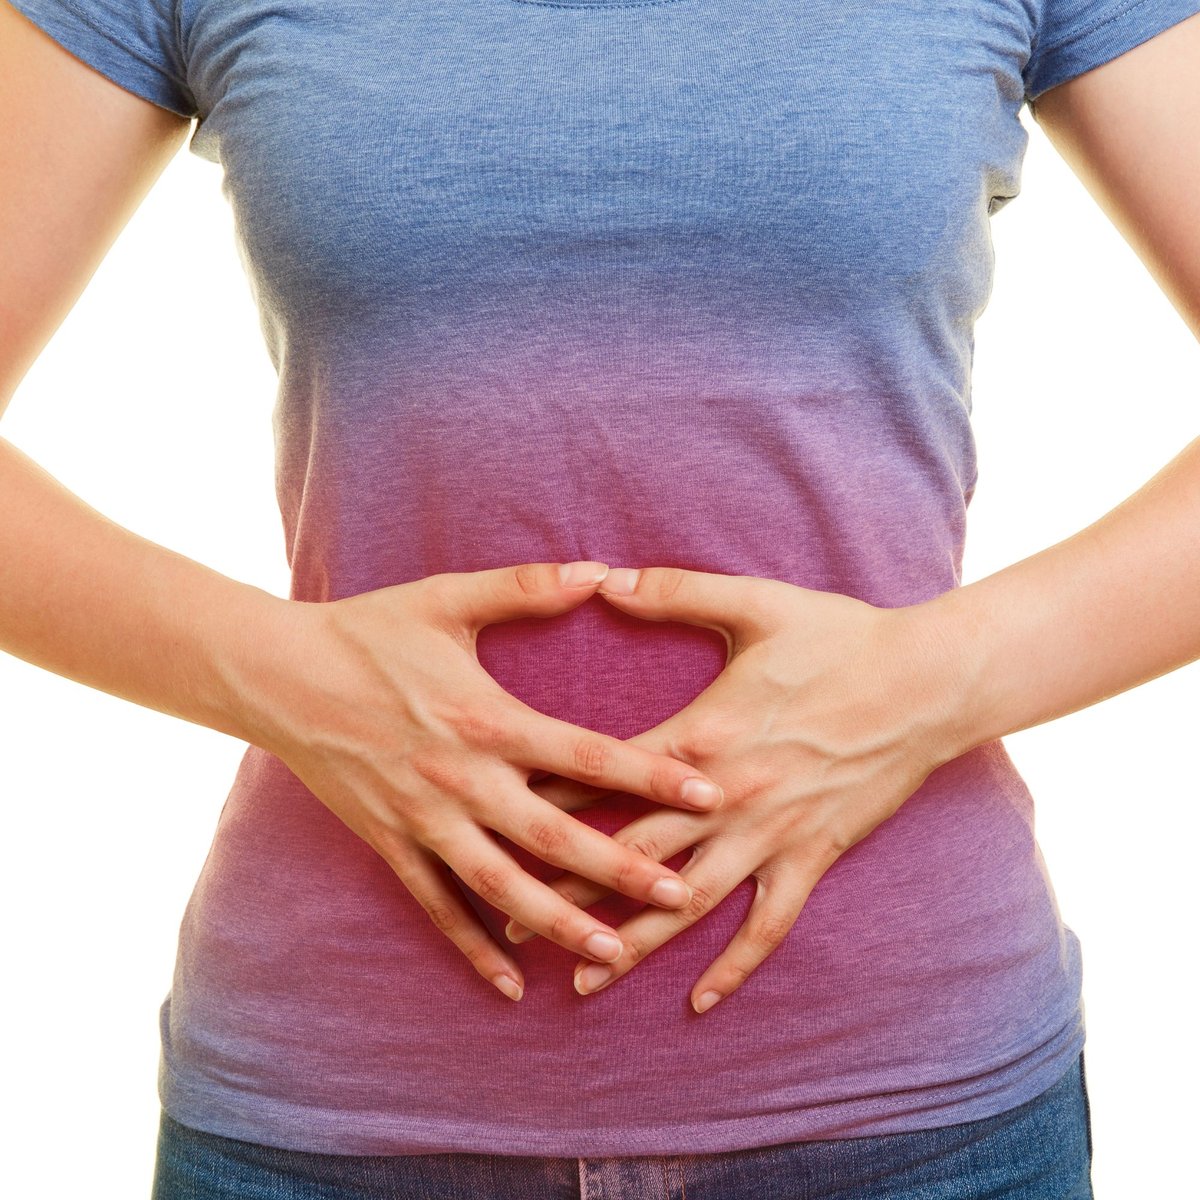 Flatulence and Indigestion - Online Doctor Consultation in Pune.